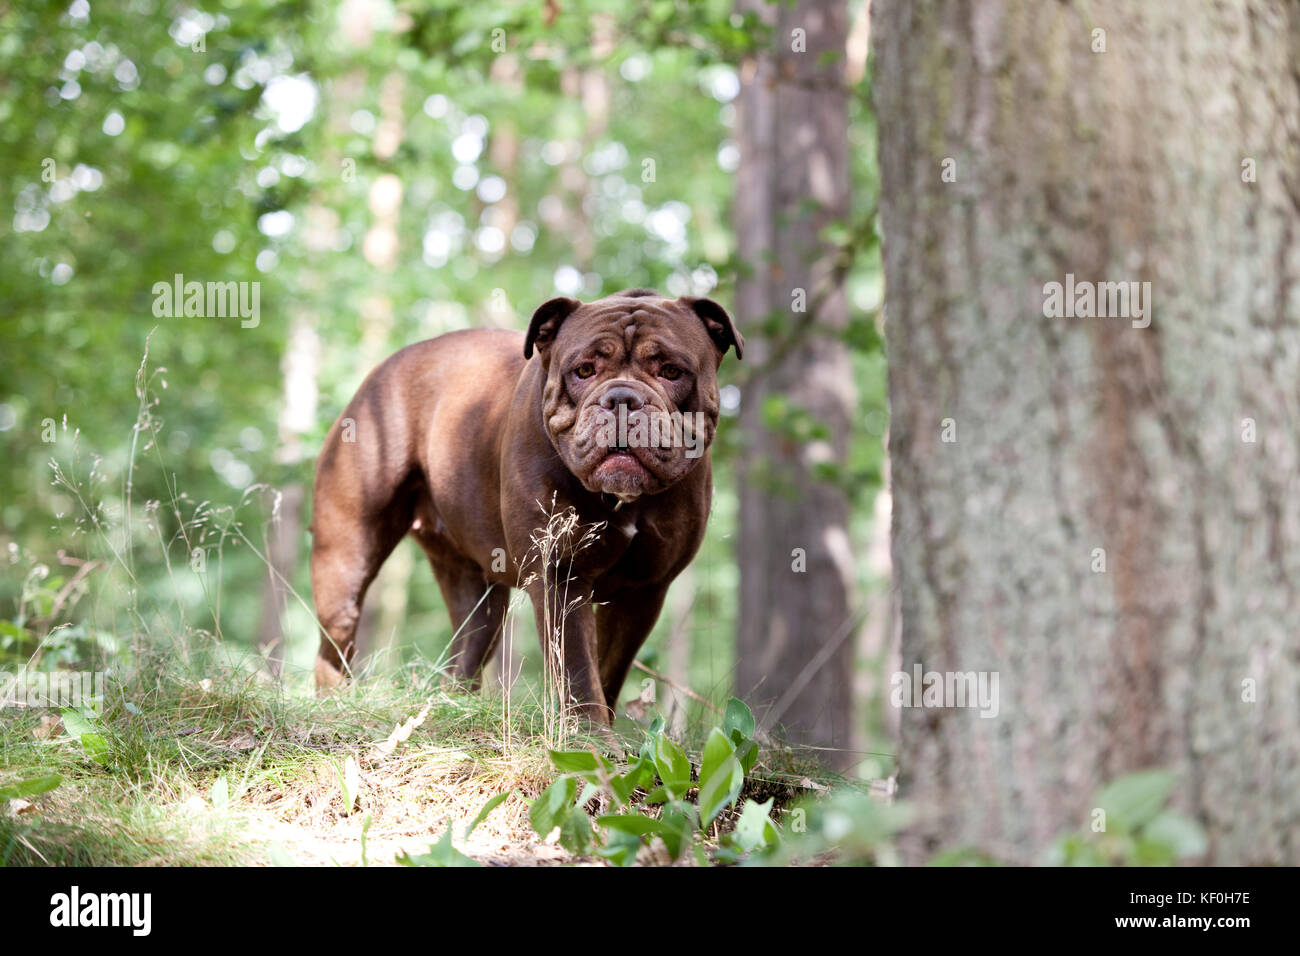 Olde English Bulldogge standing in forest Stock Photo